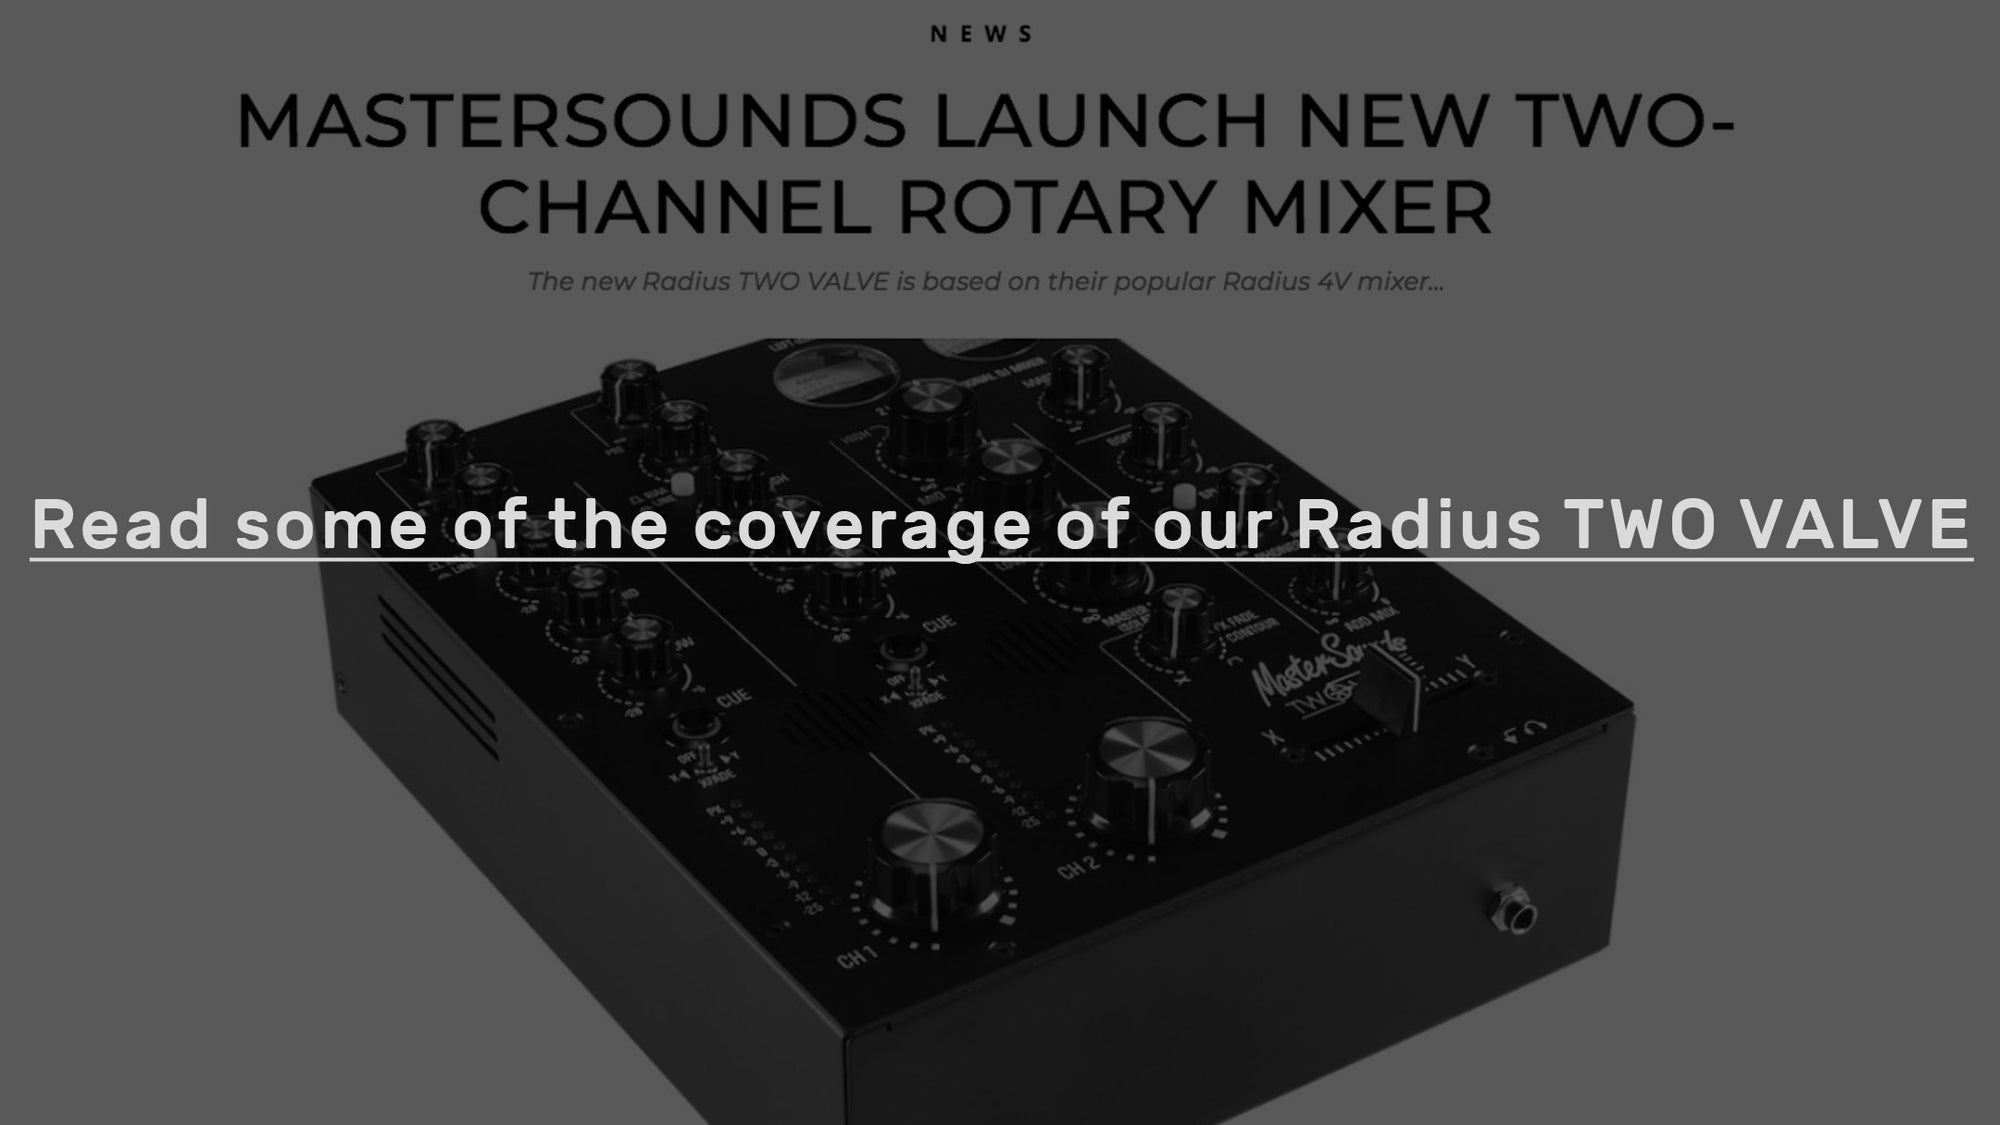 Take a look at some of the coverage of the Radius TWO VALVE so far - MasterSounds